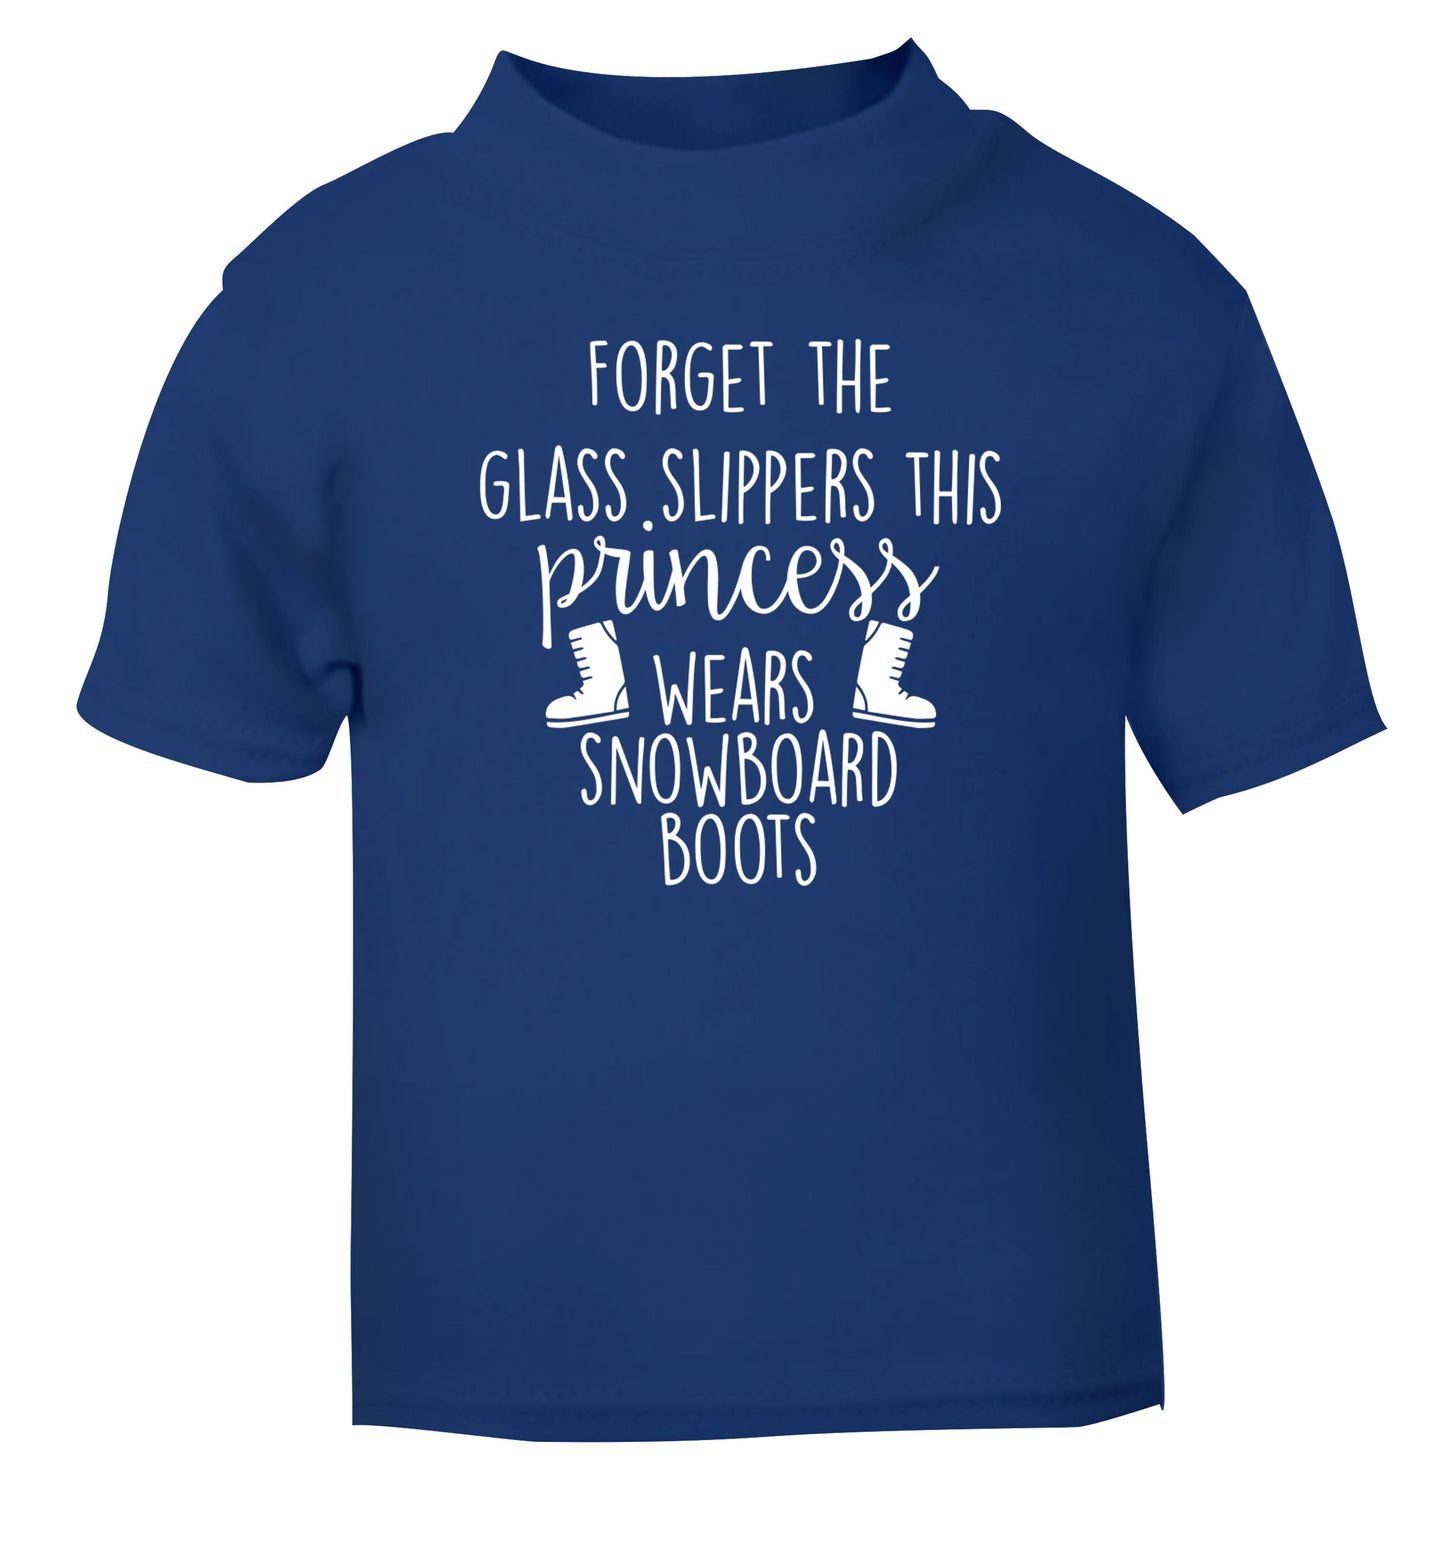 Forget the glass slippers this princess wears snowboard boots blue Baby Toddler Tshirt 2 Years